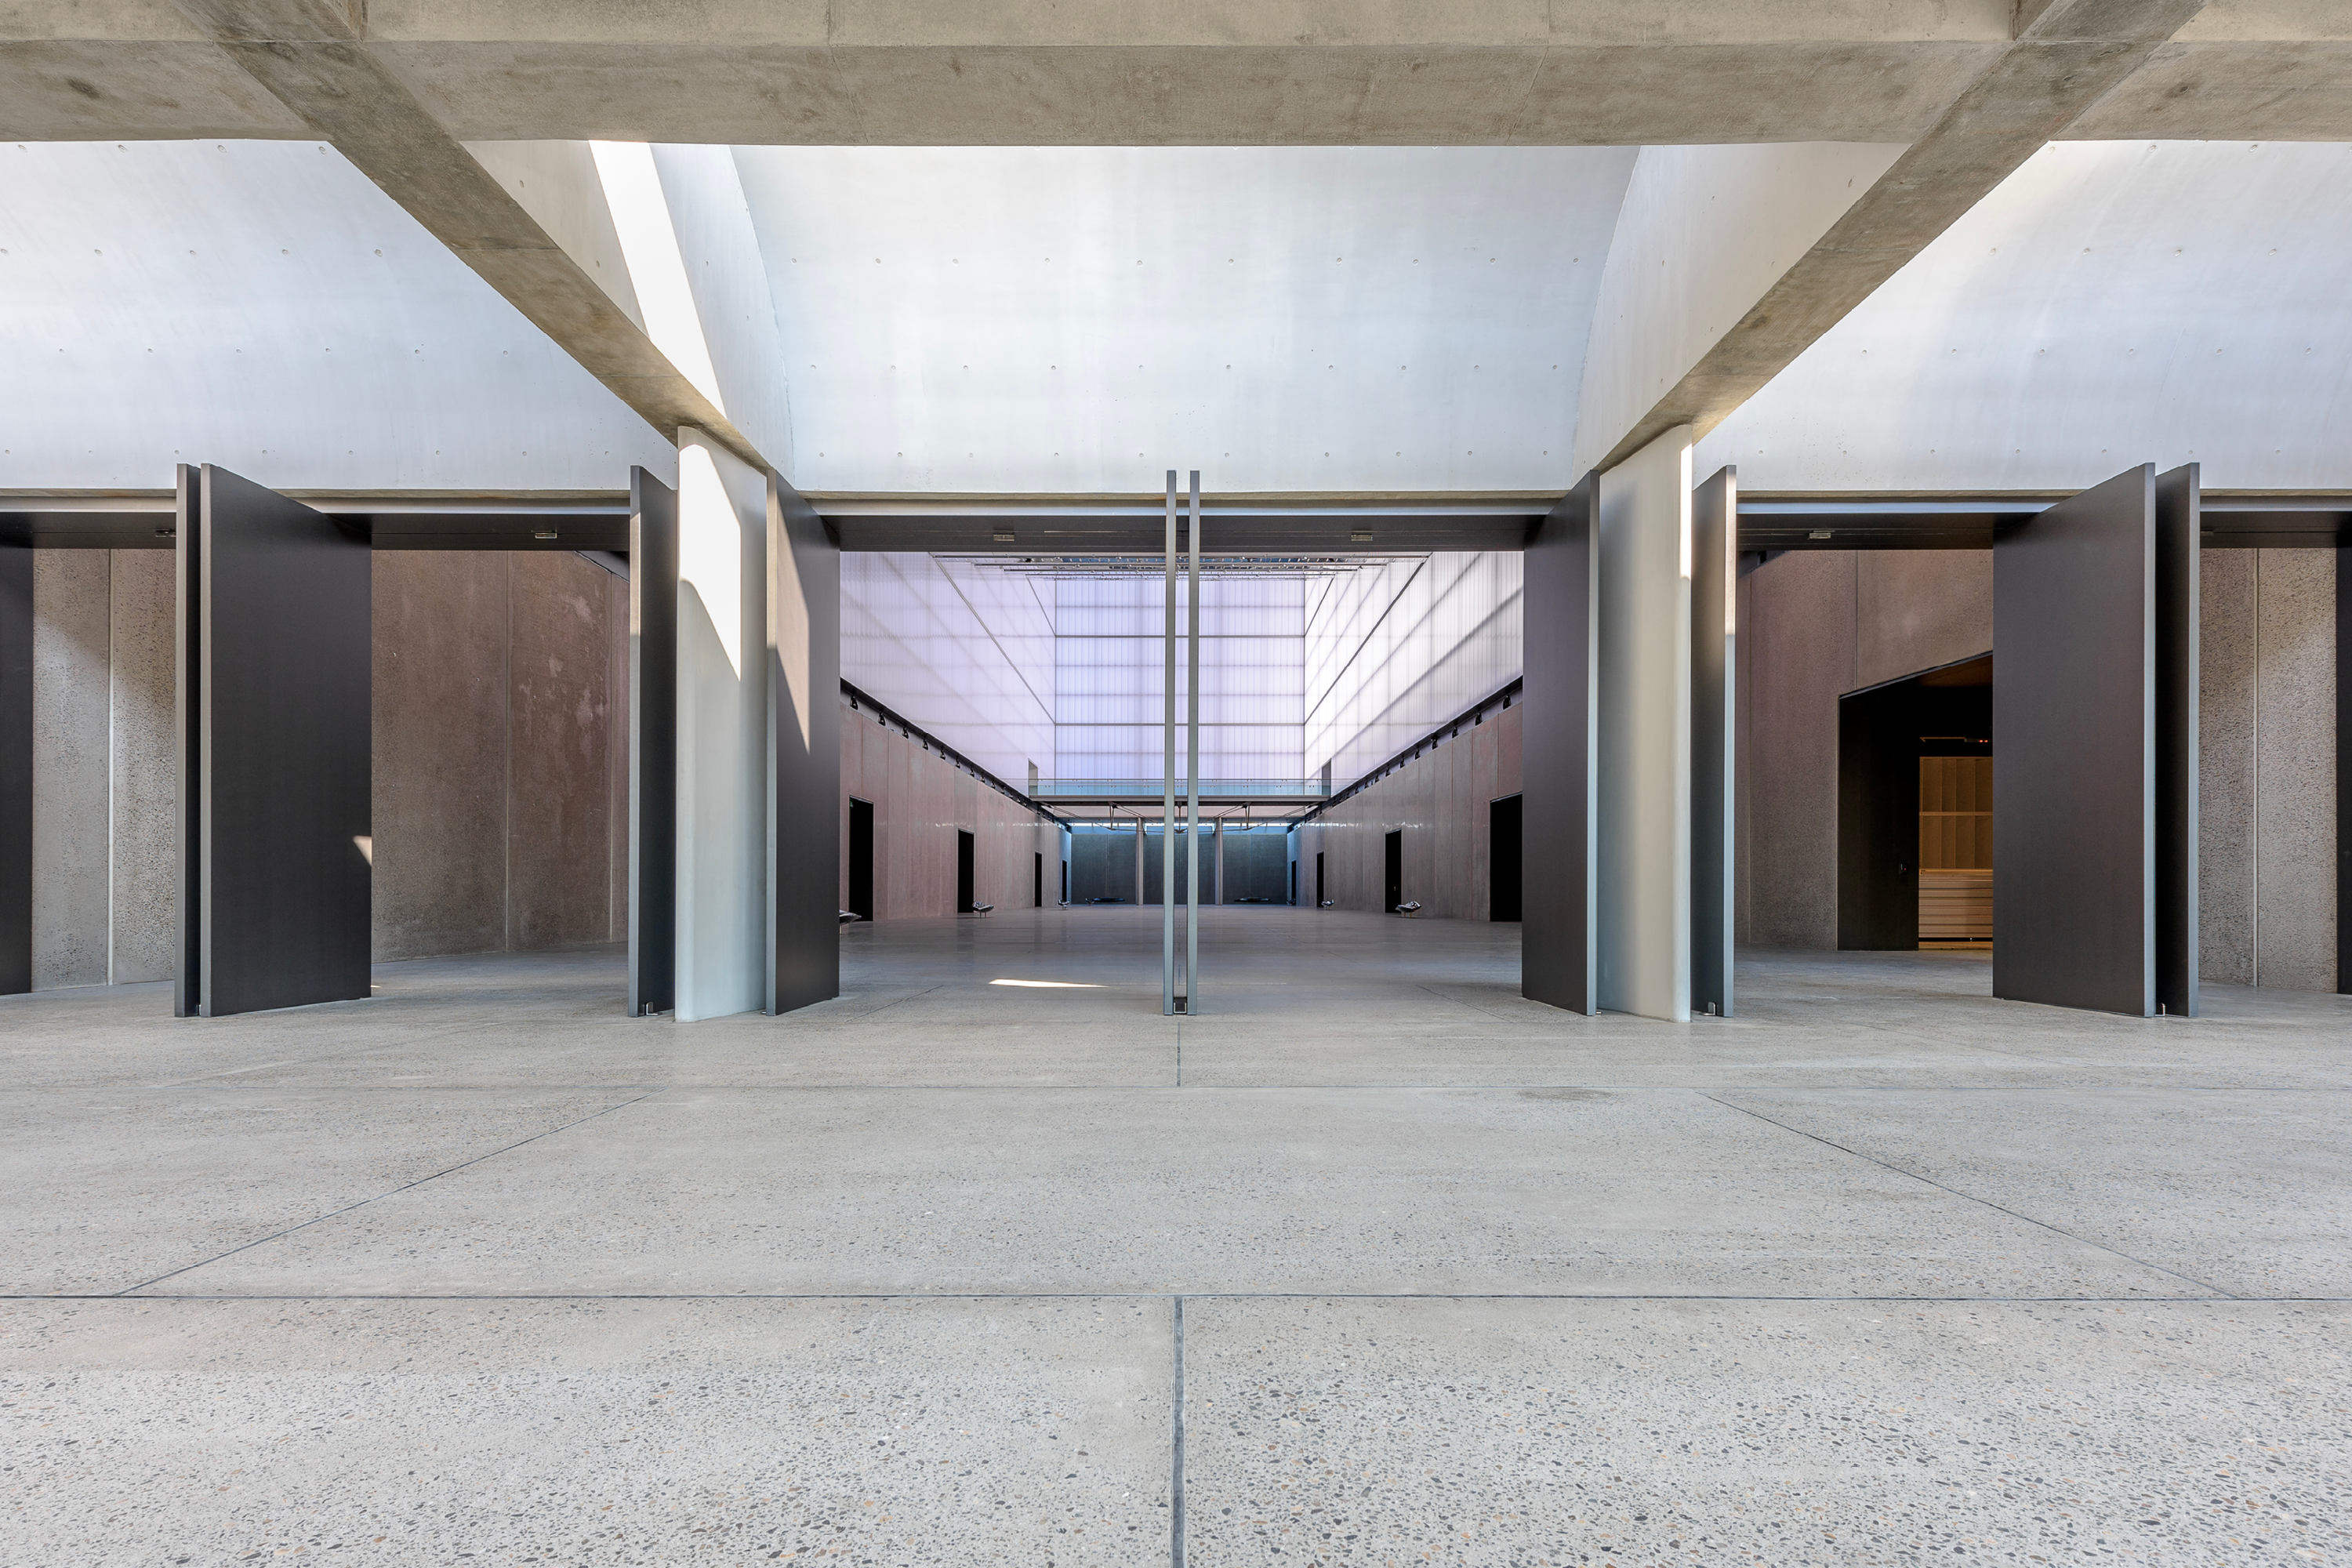 Photograph of the award-wining DANGROVE Art Storage Facility interiors designed by Tzannes